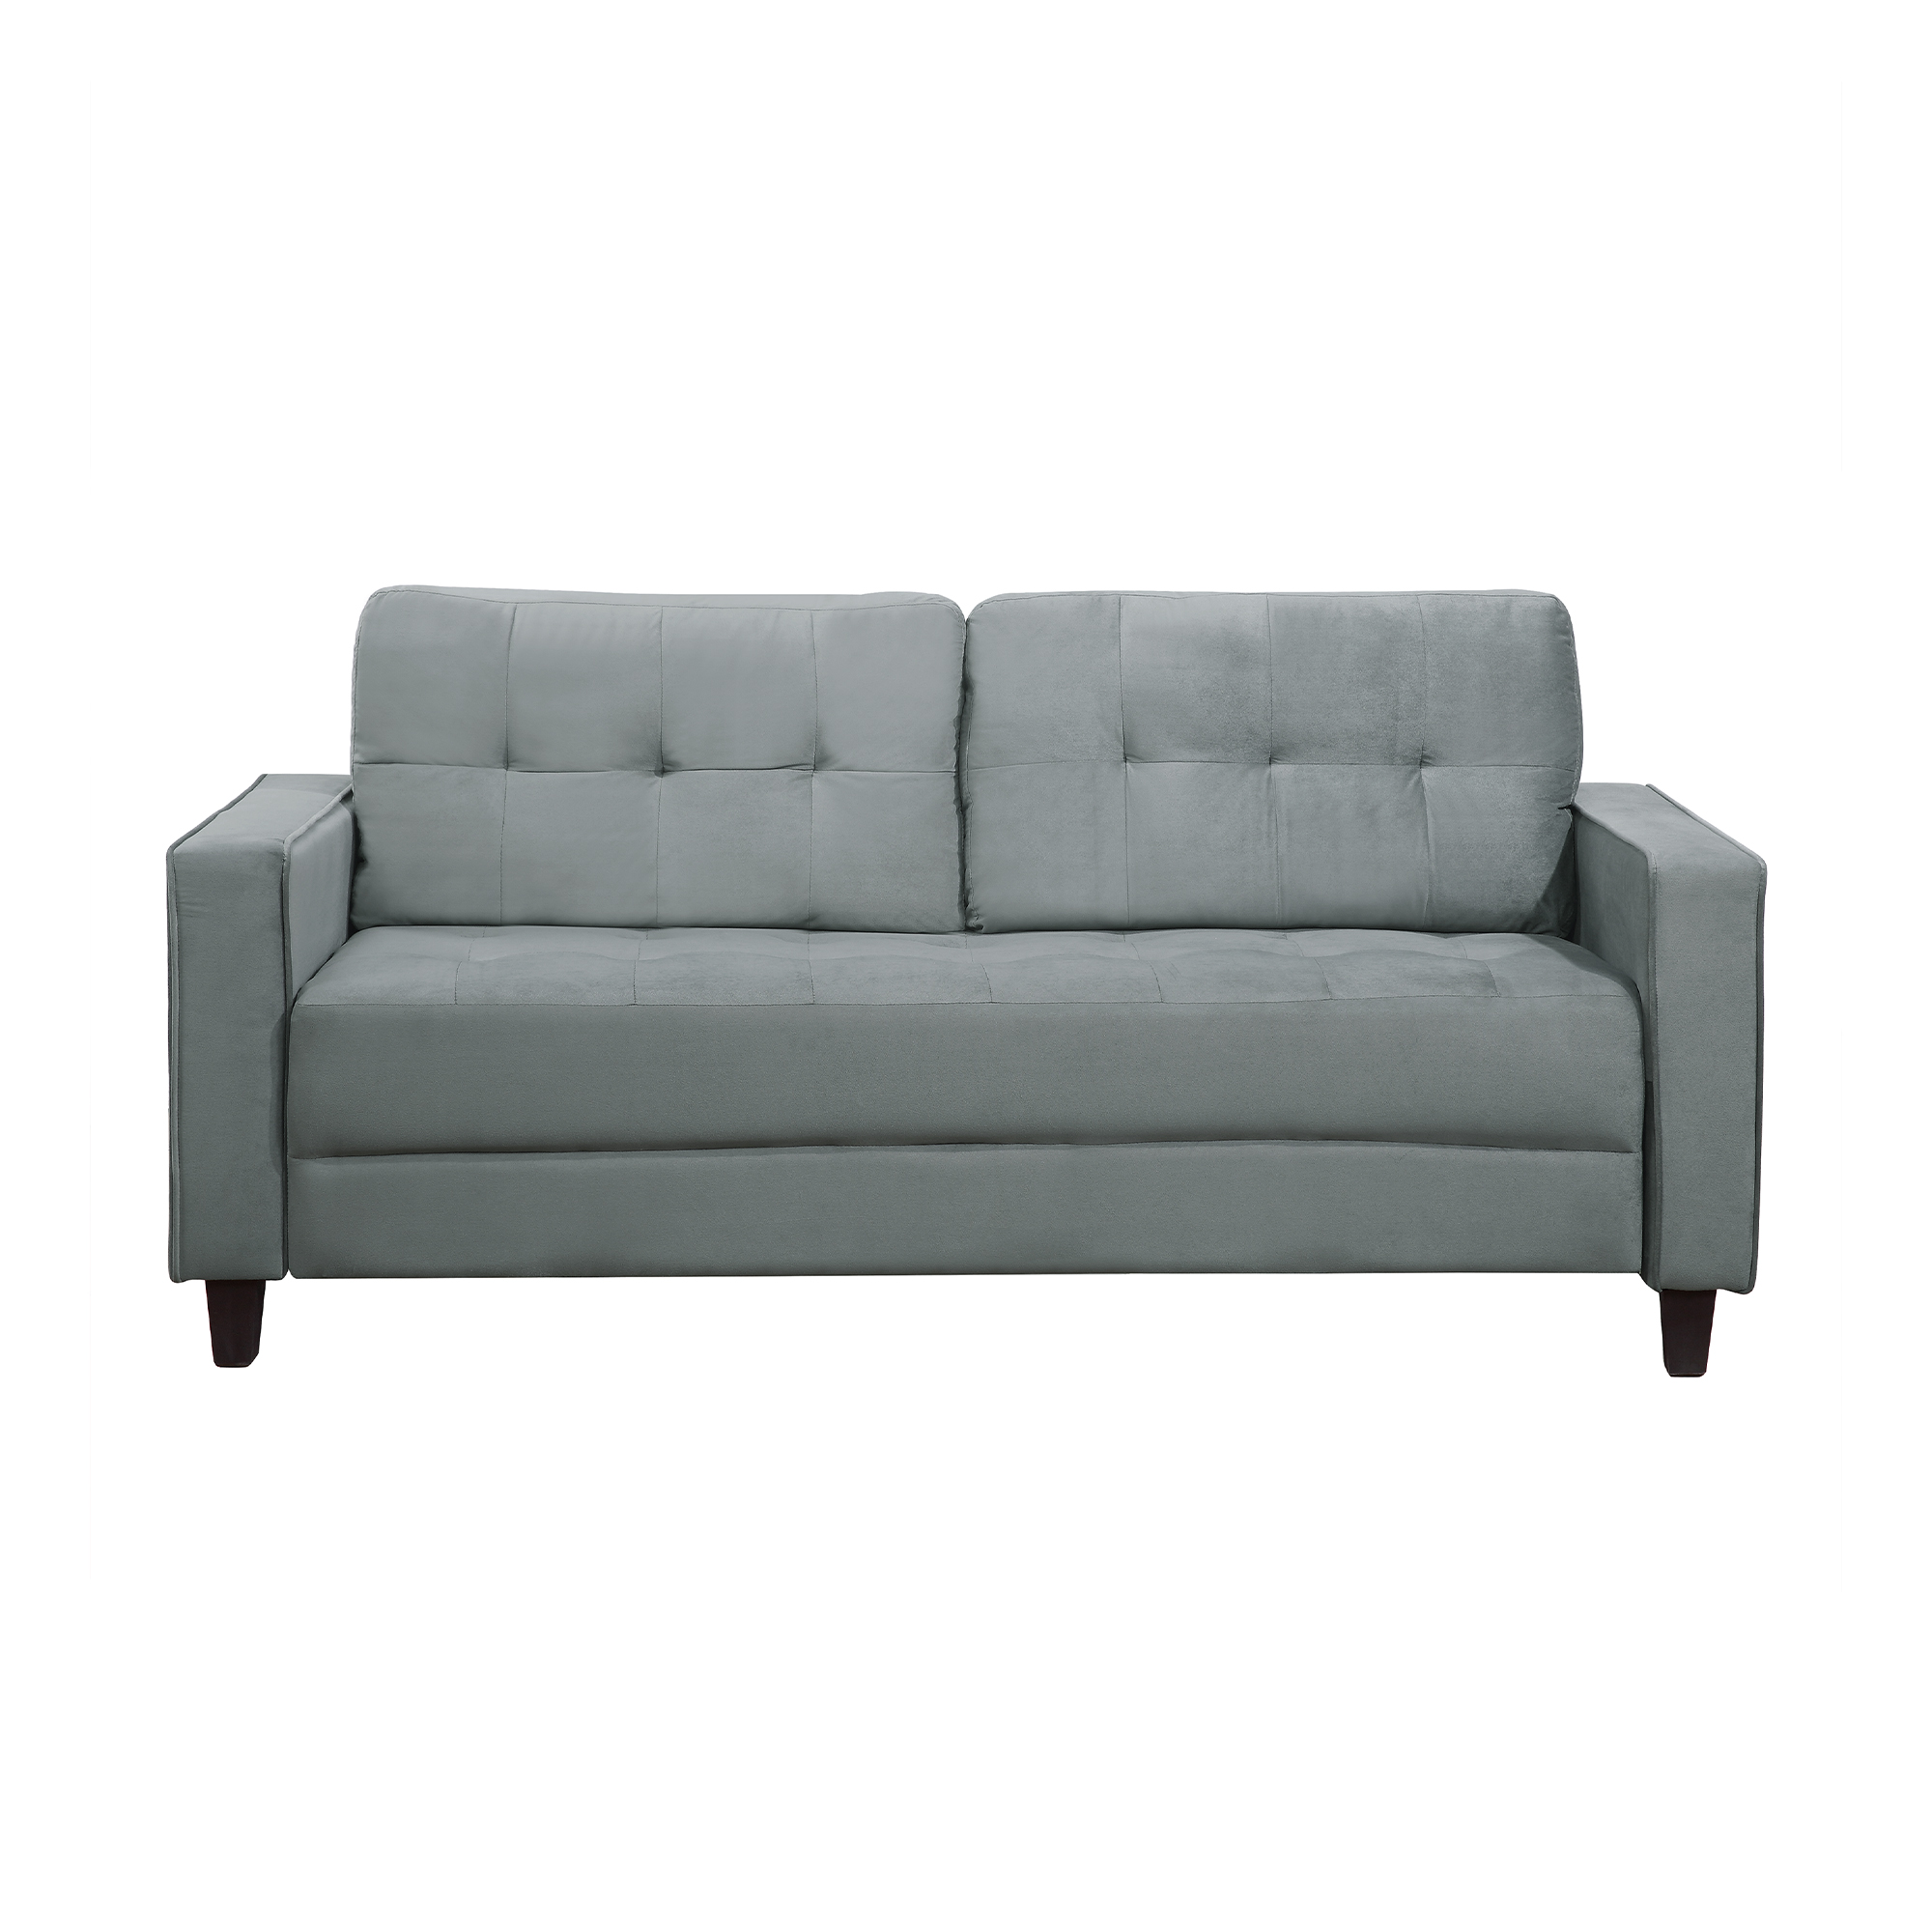 Orisfur. Comfortable 3-Seat Sofa Modern Couch for Home Living Room (3-Seat)